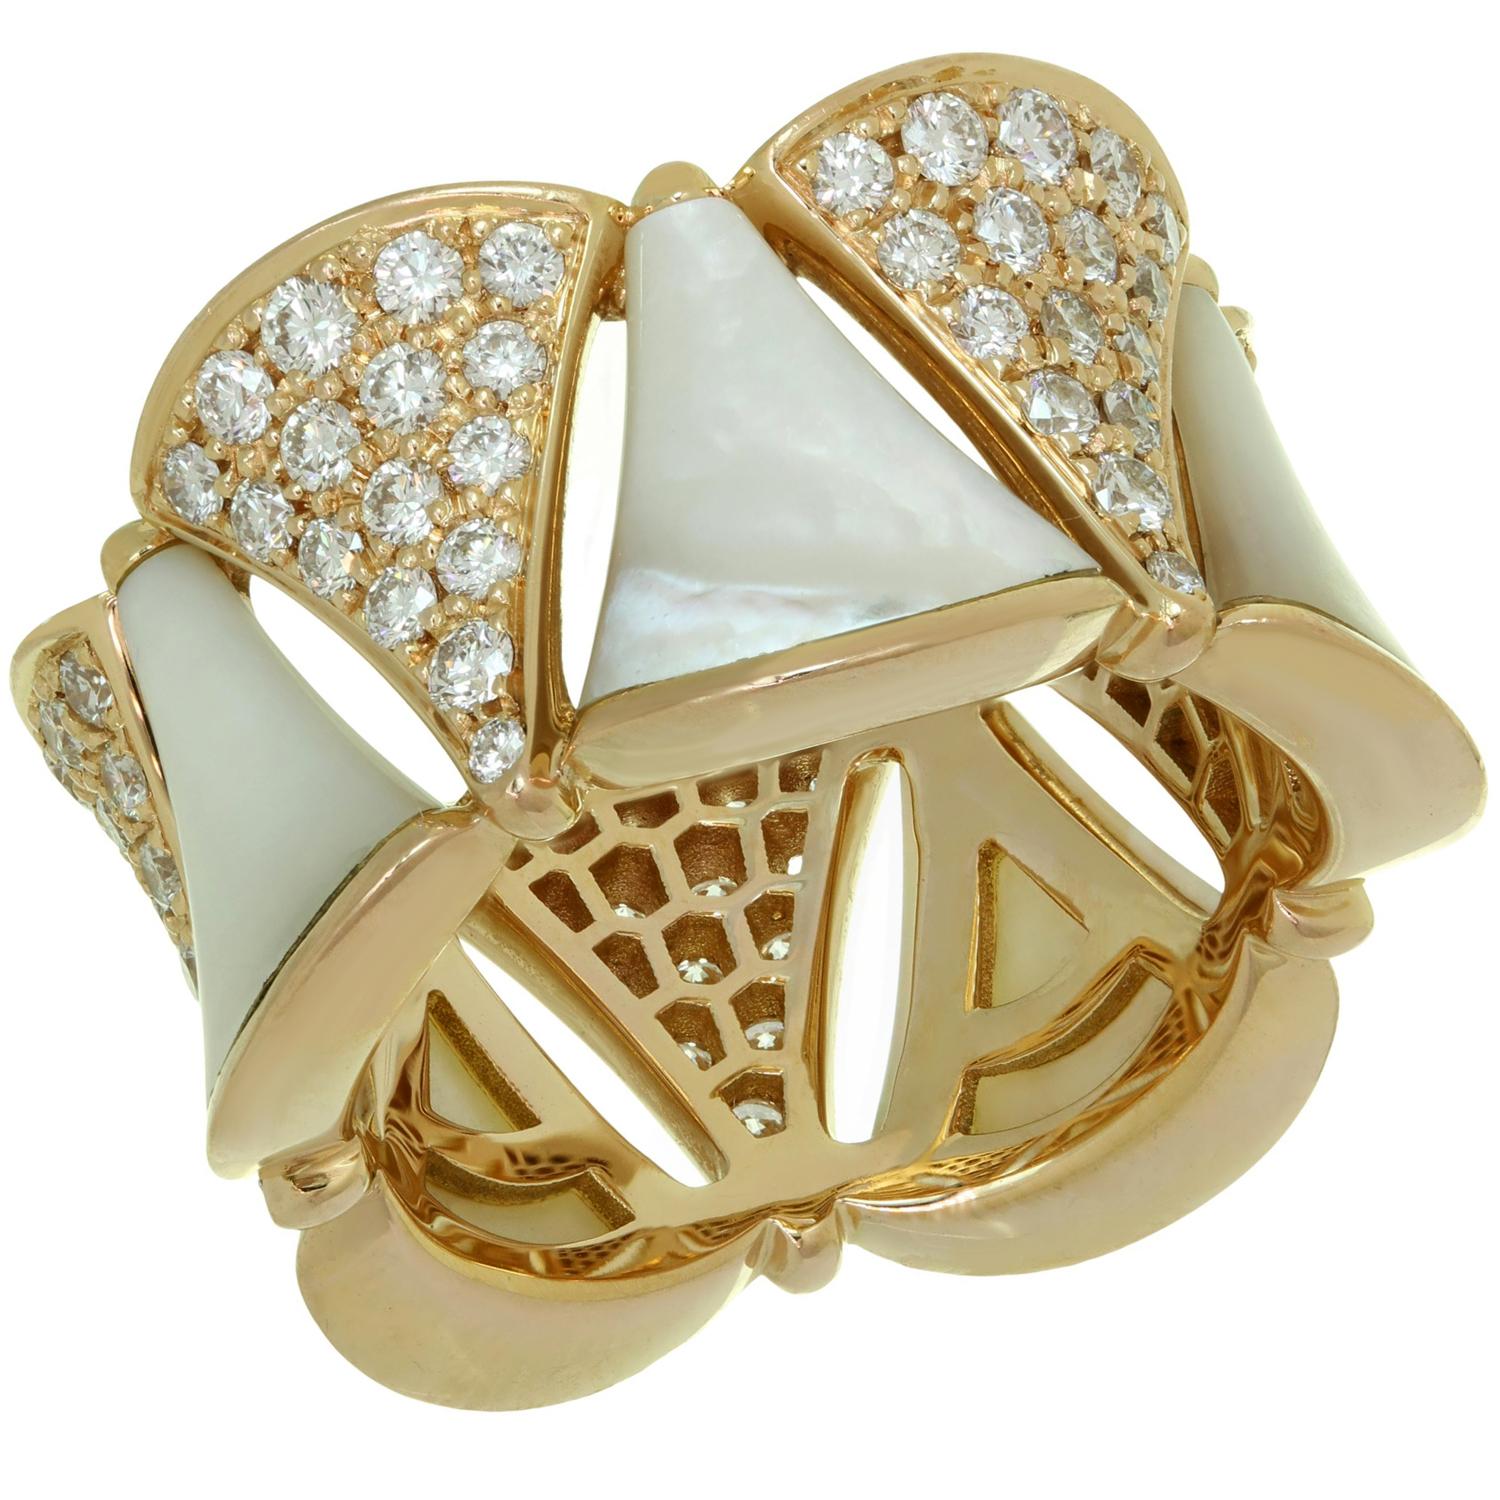 Bvlgari Divas Dream Diamond Mother-of-pearl 18k Rose Gold Ring In Excellent Condition For Sale In New York, NY